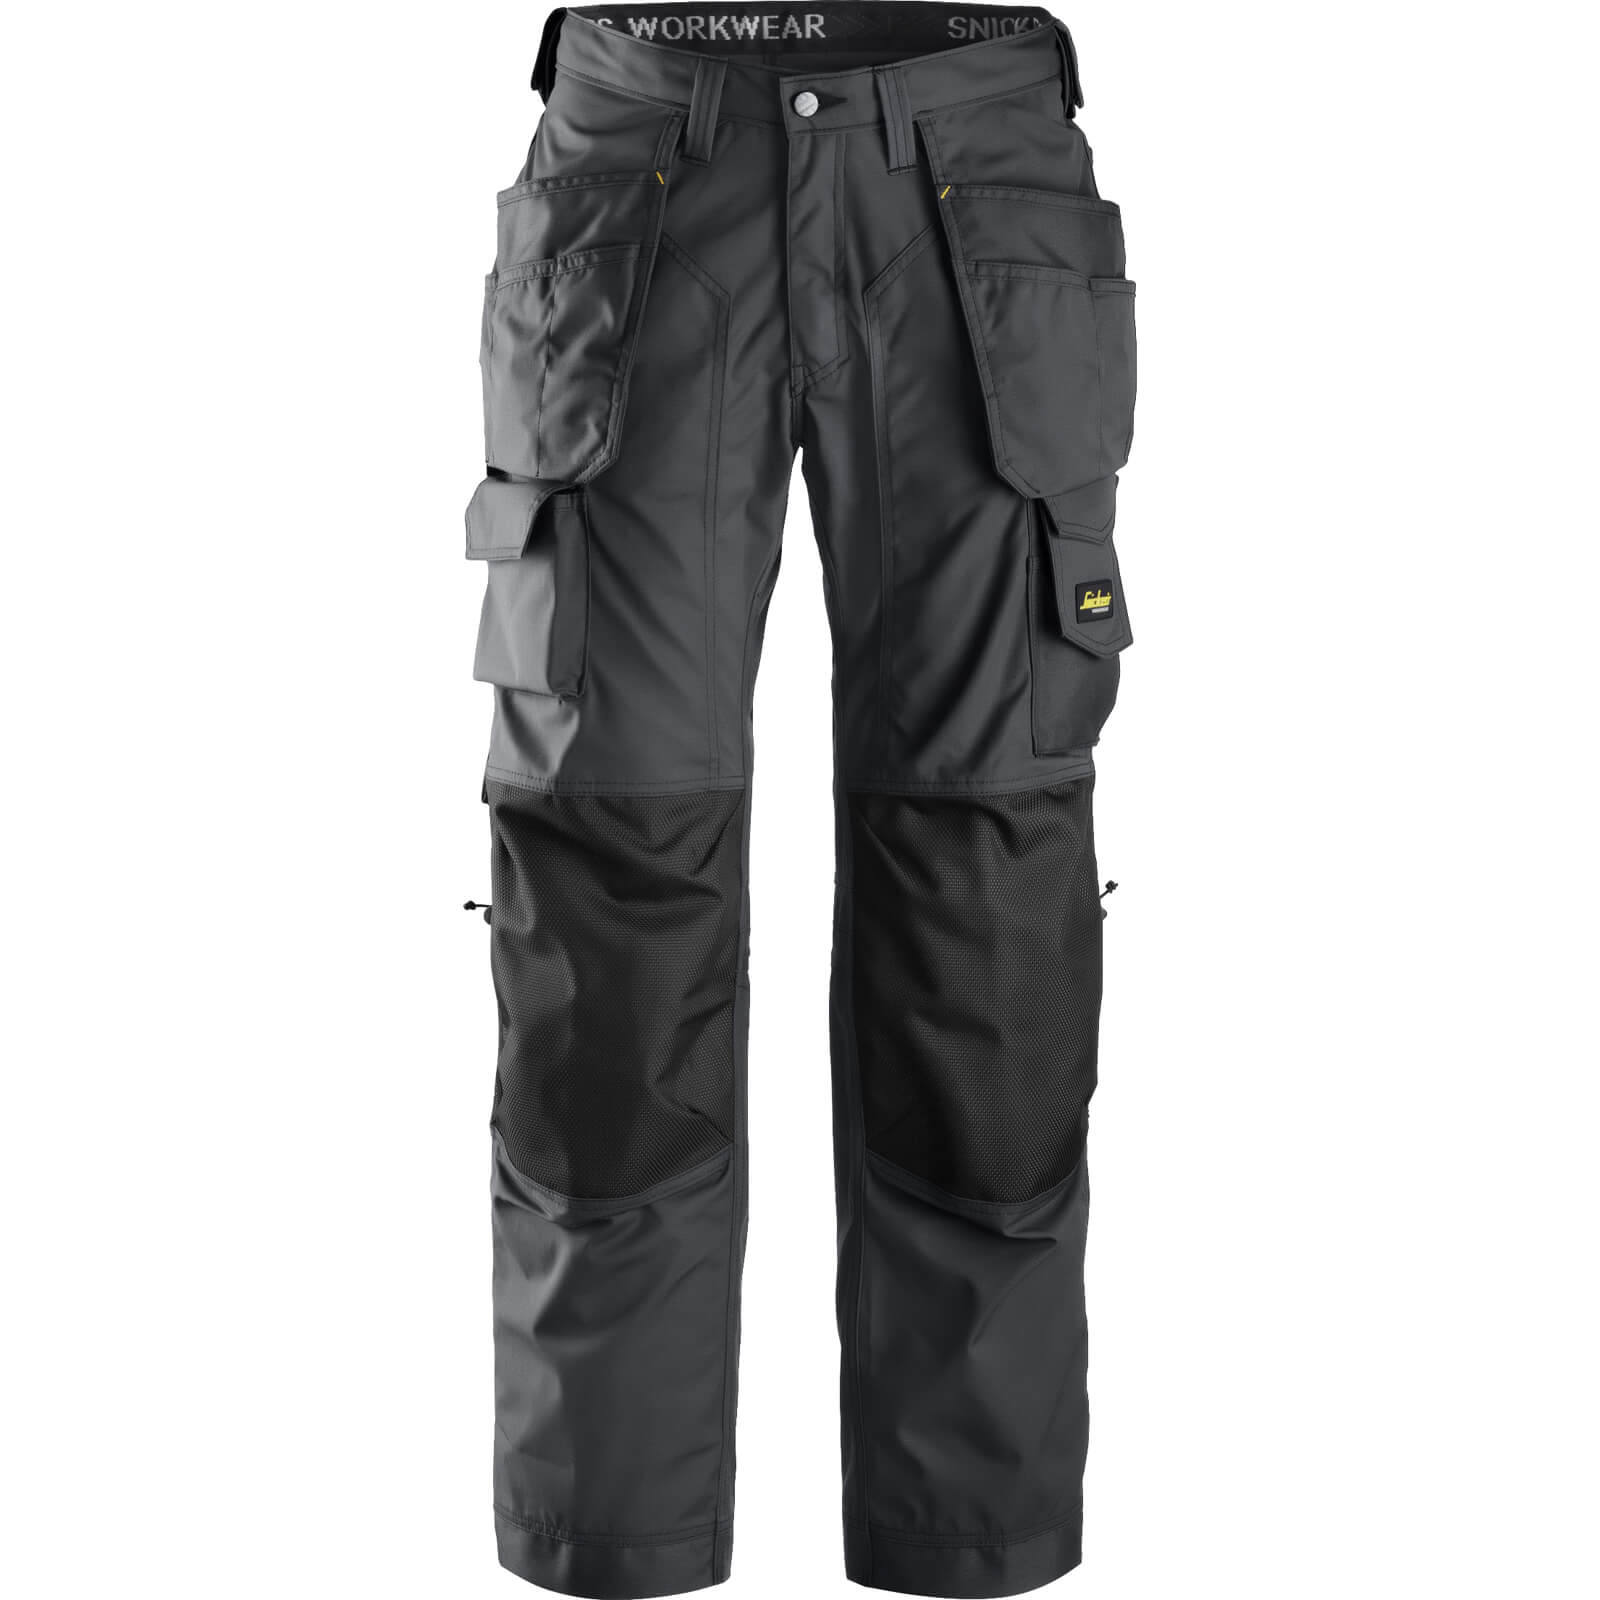 Image of Snickers 3223 Mens Rip Stop Floor Layer Work Trousers Black / Grey 35" 30"